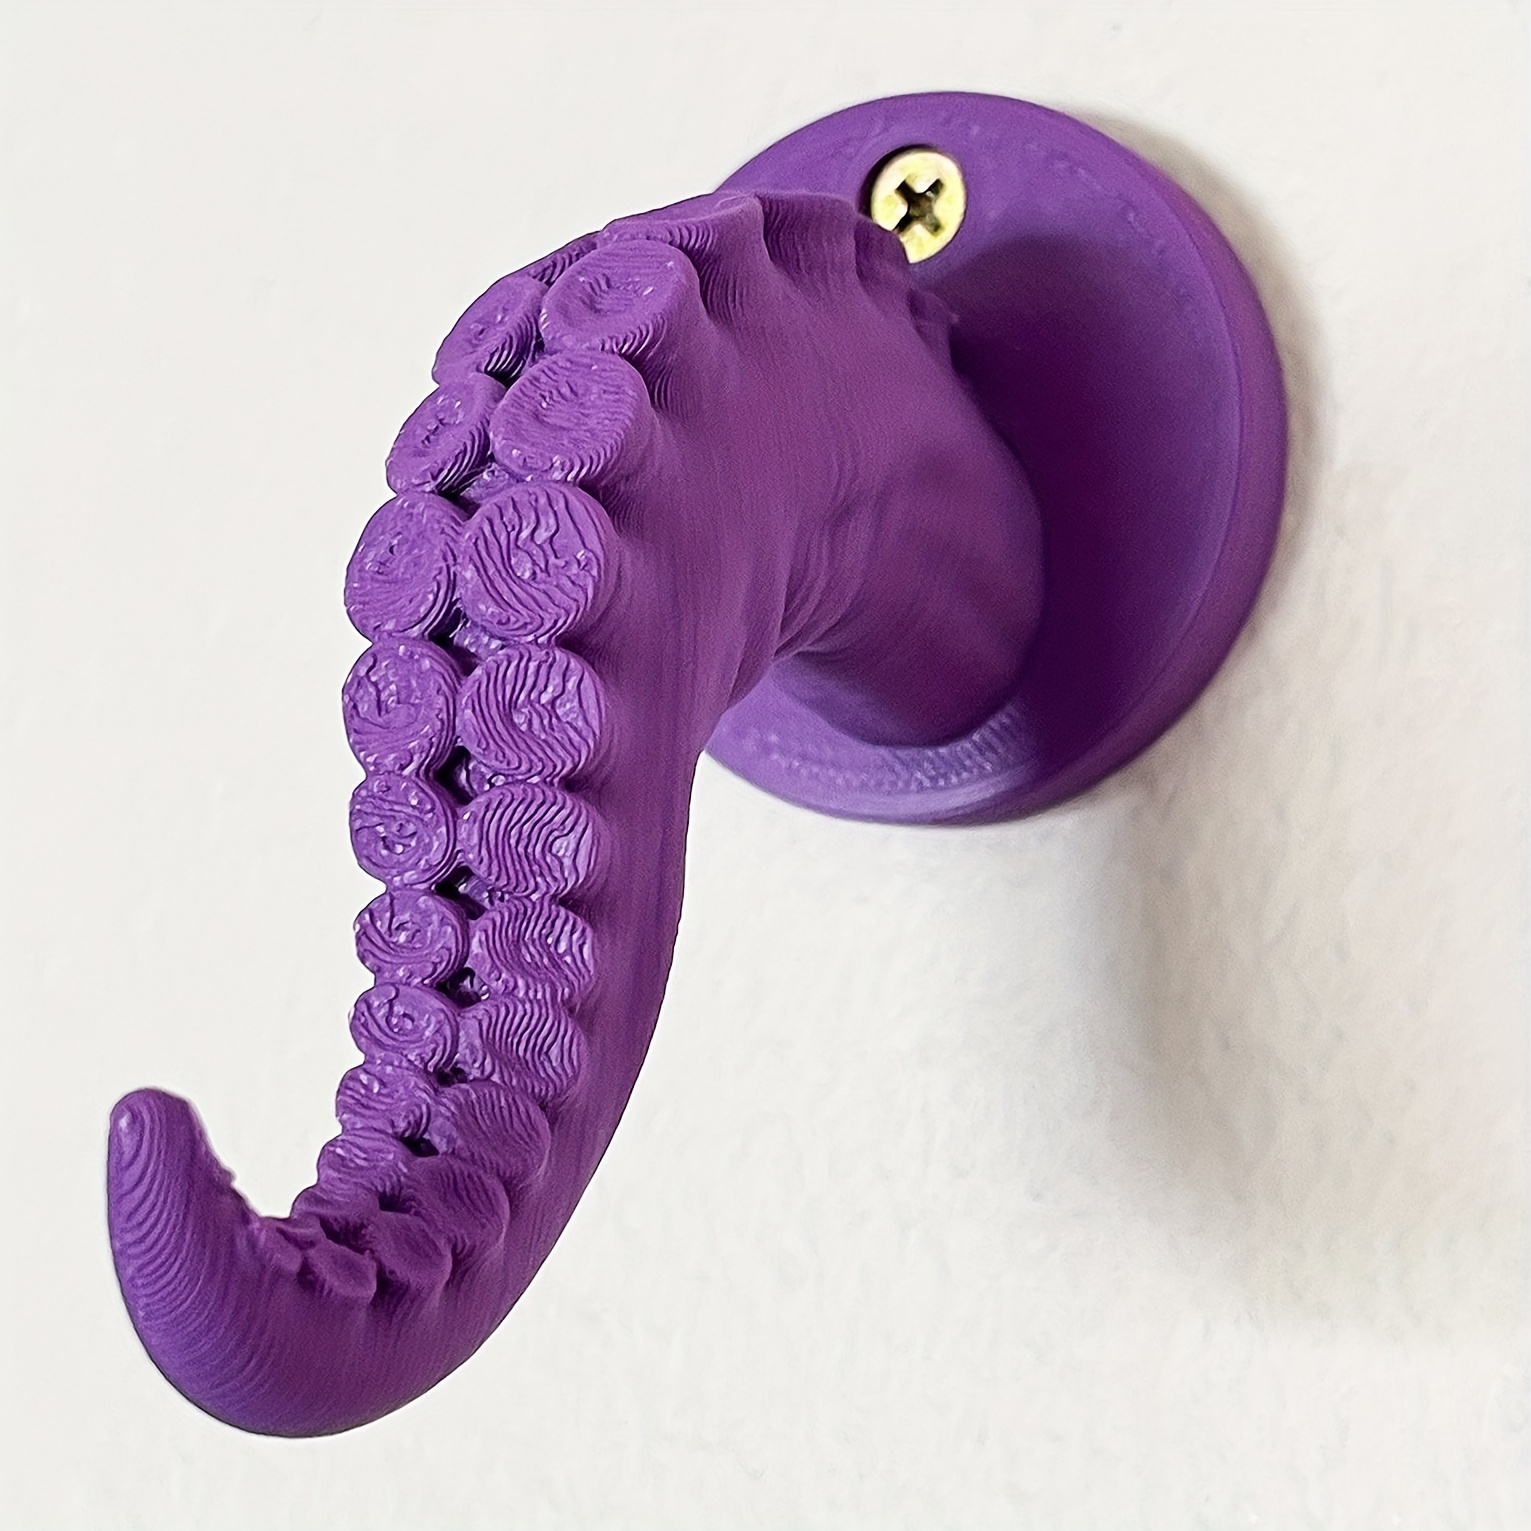 1pc Octopus Tentacle-shaped Hook, Wall-mounted Creative Hanger,  Multi-functional Hook For Hanging Clothes Towel And Robe, Bathroom  Accessories, Home D